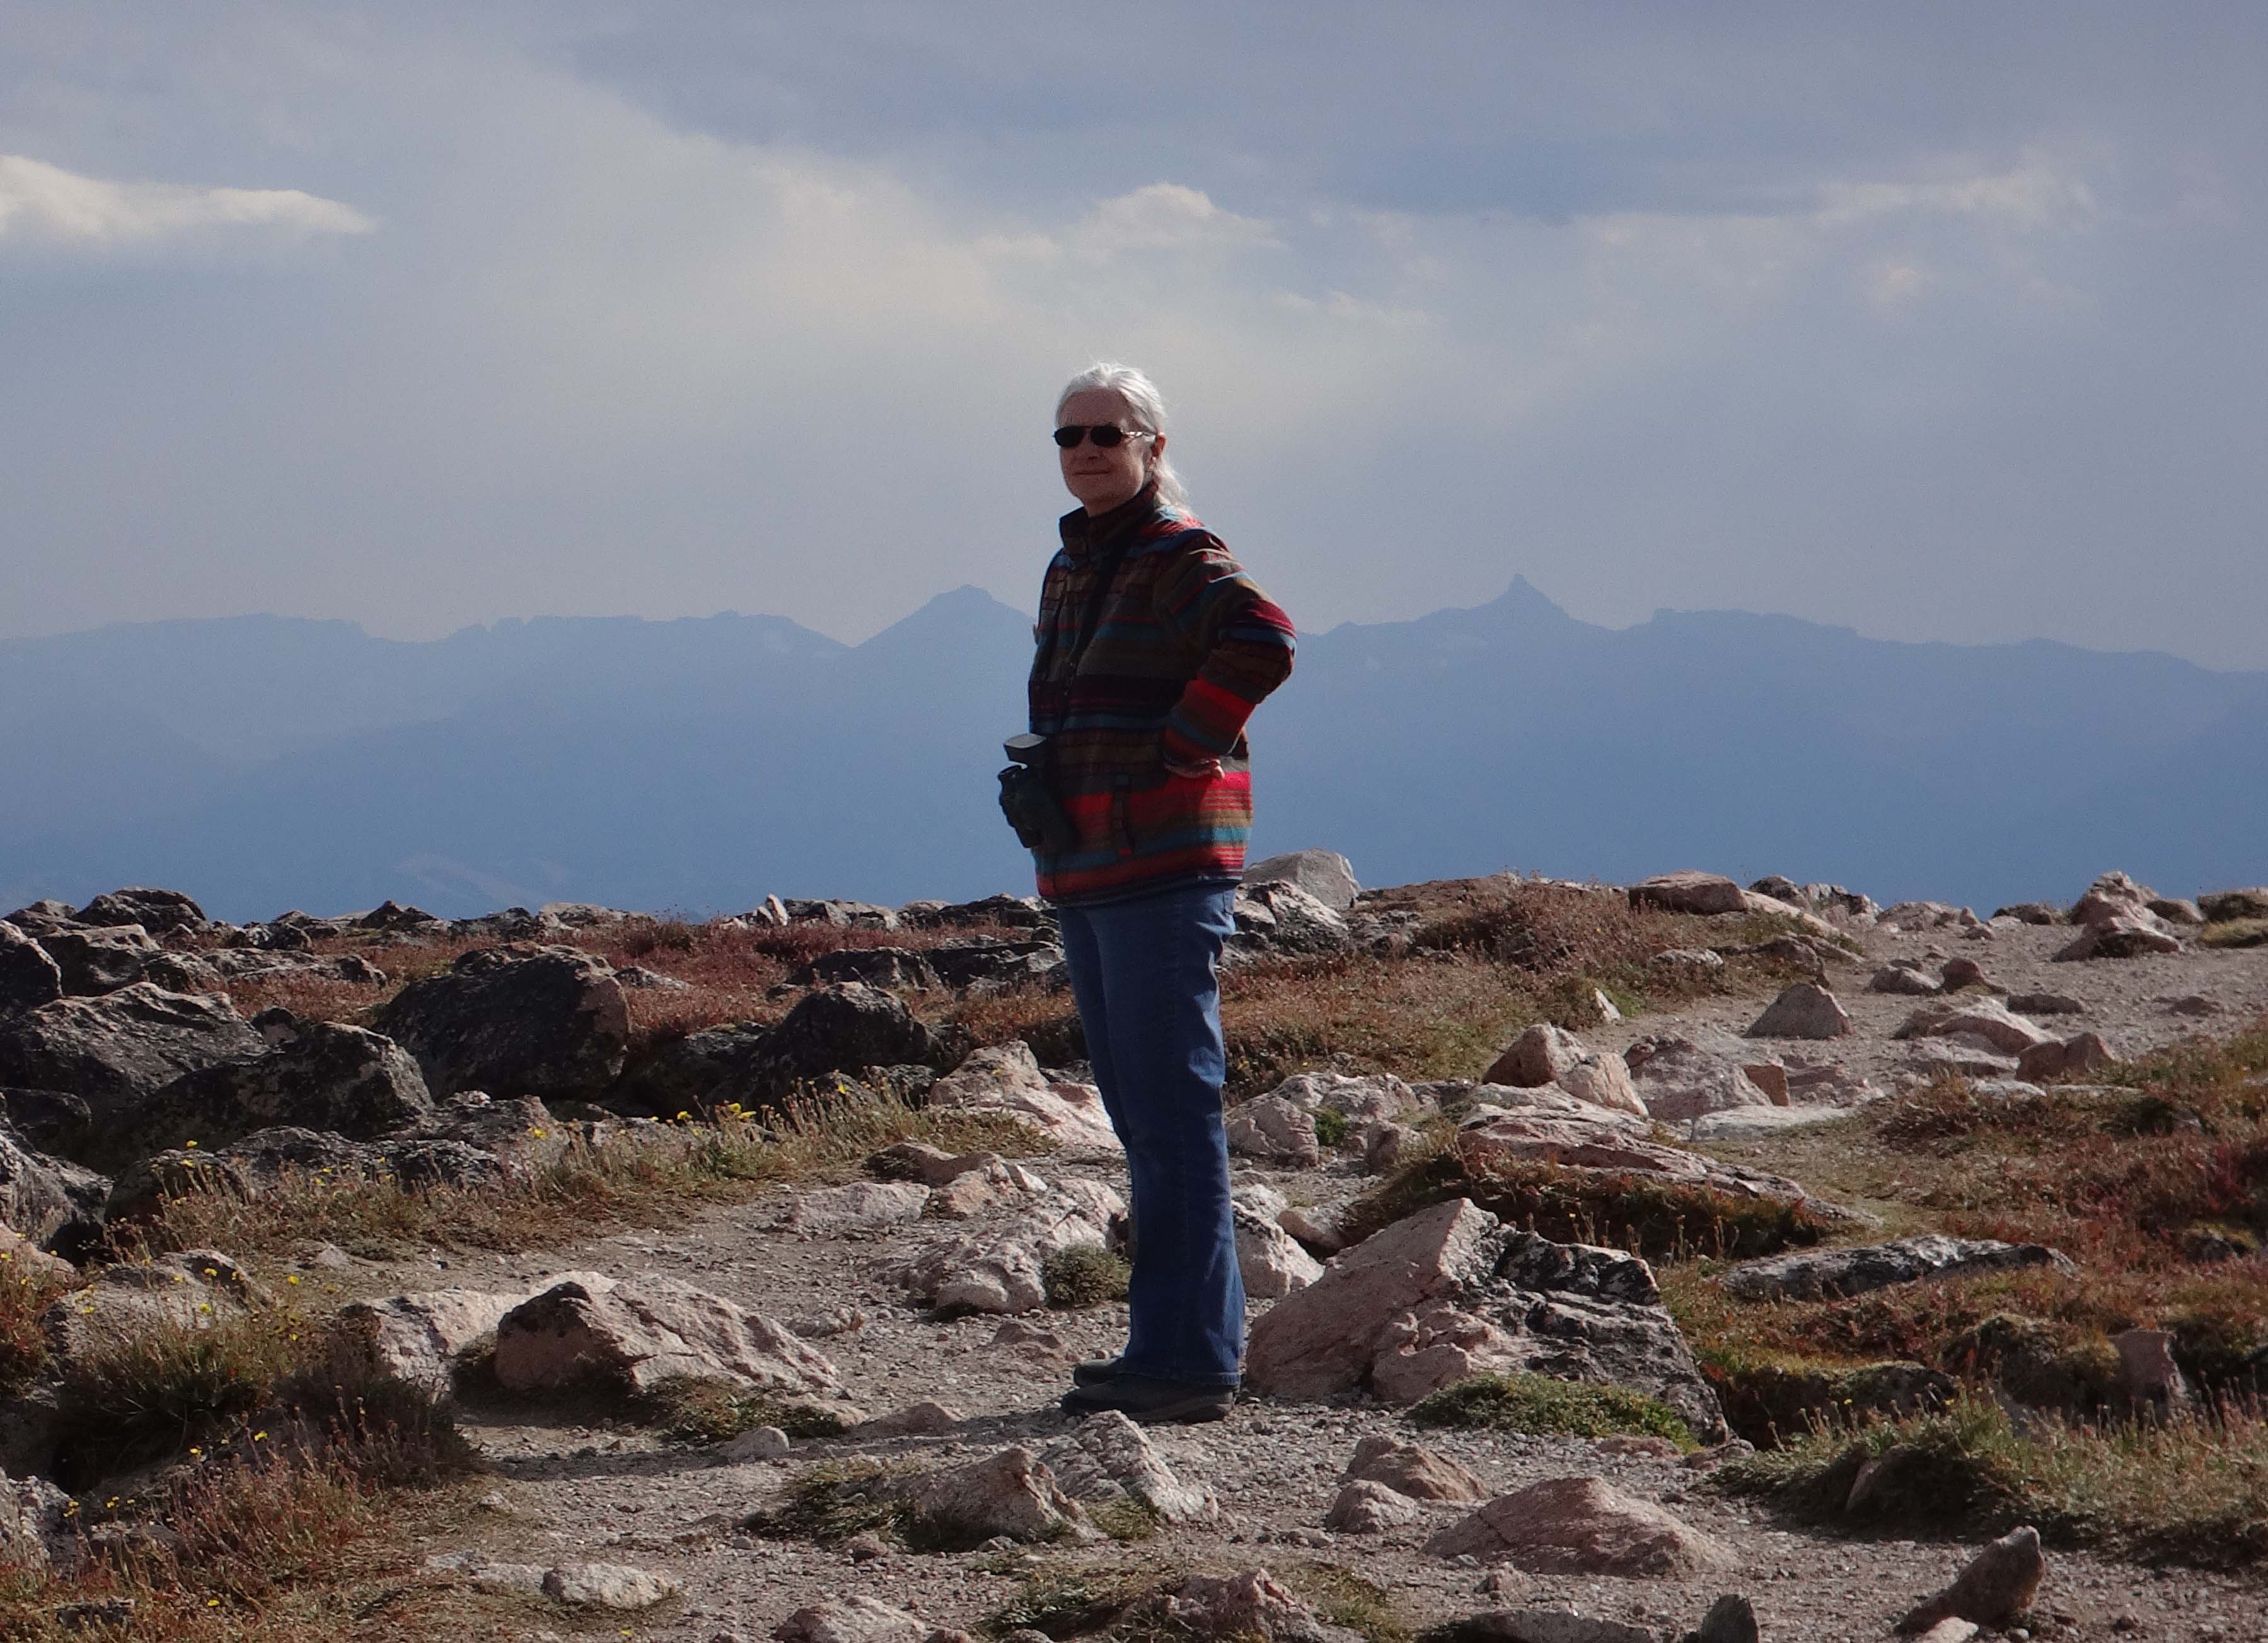 Dr. Horton stands among shrubs in front of mountains and turns back to look at the camera